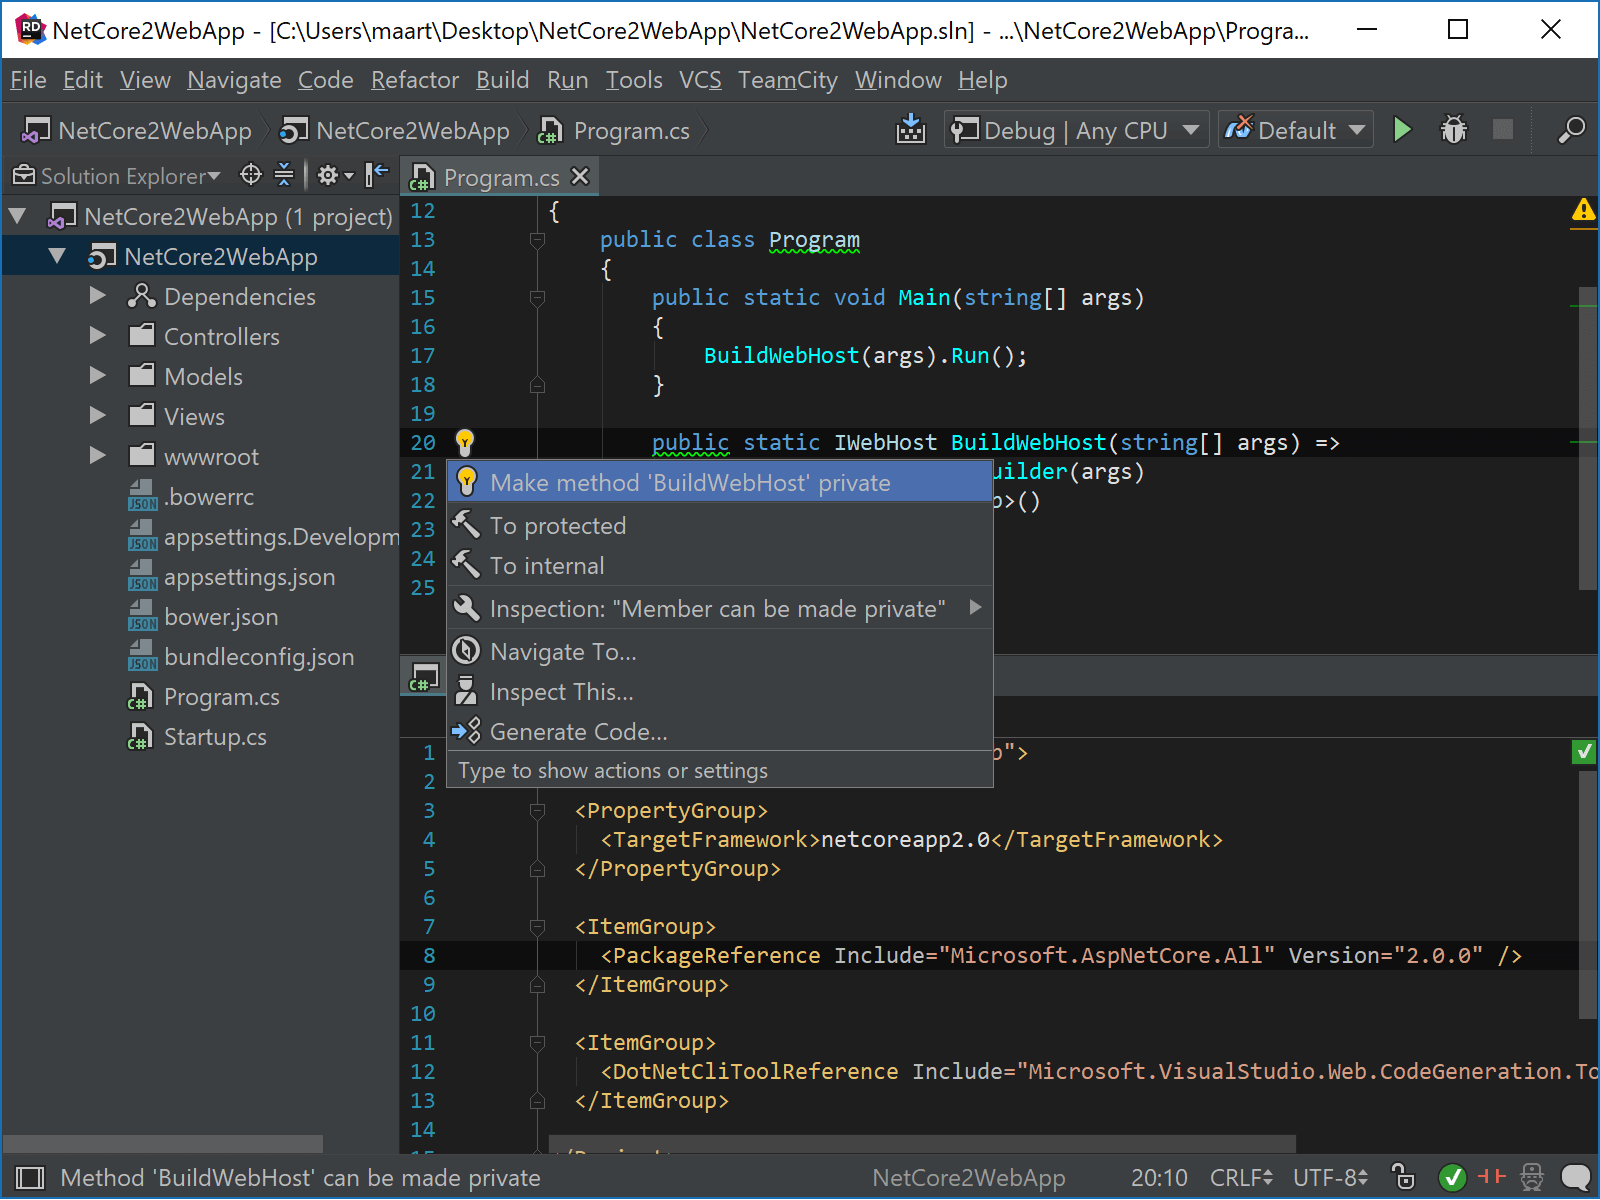 .NET Core 2.0 support in Rider